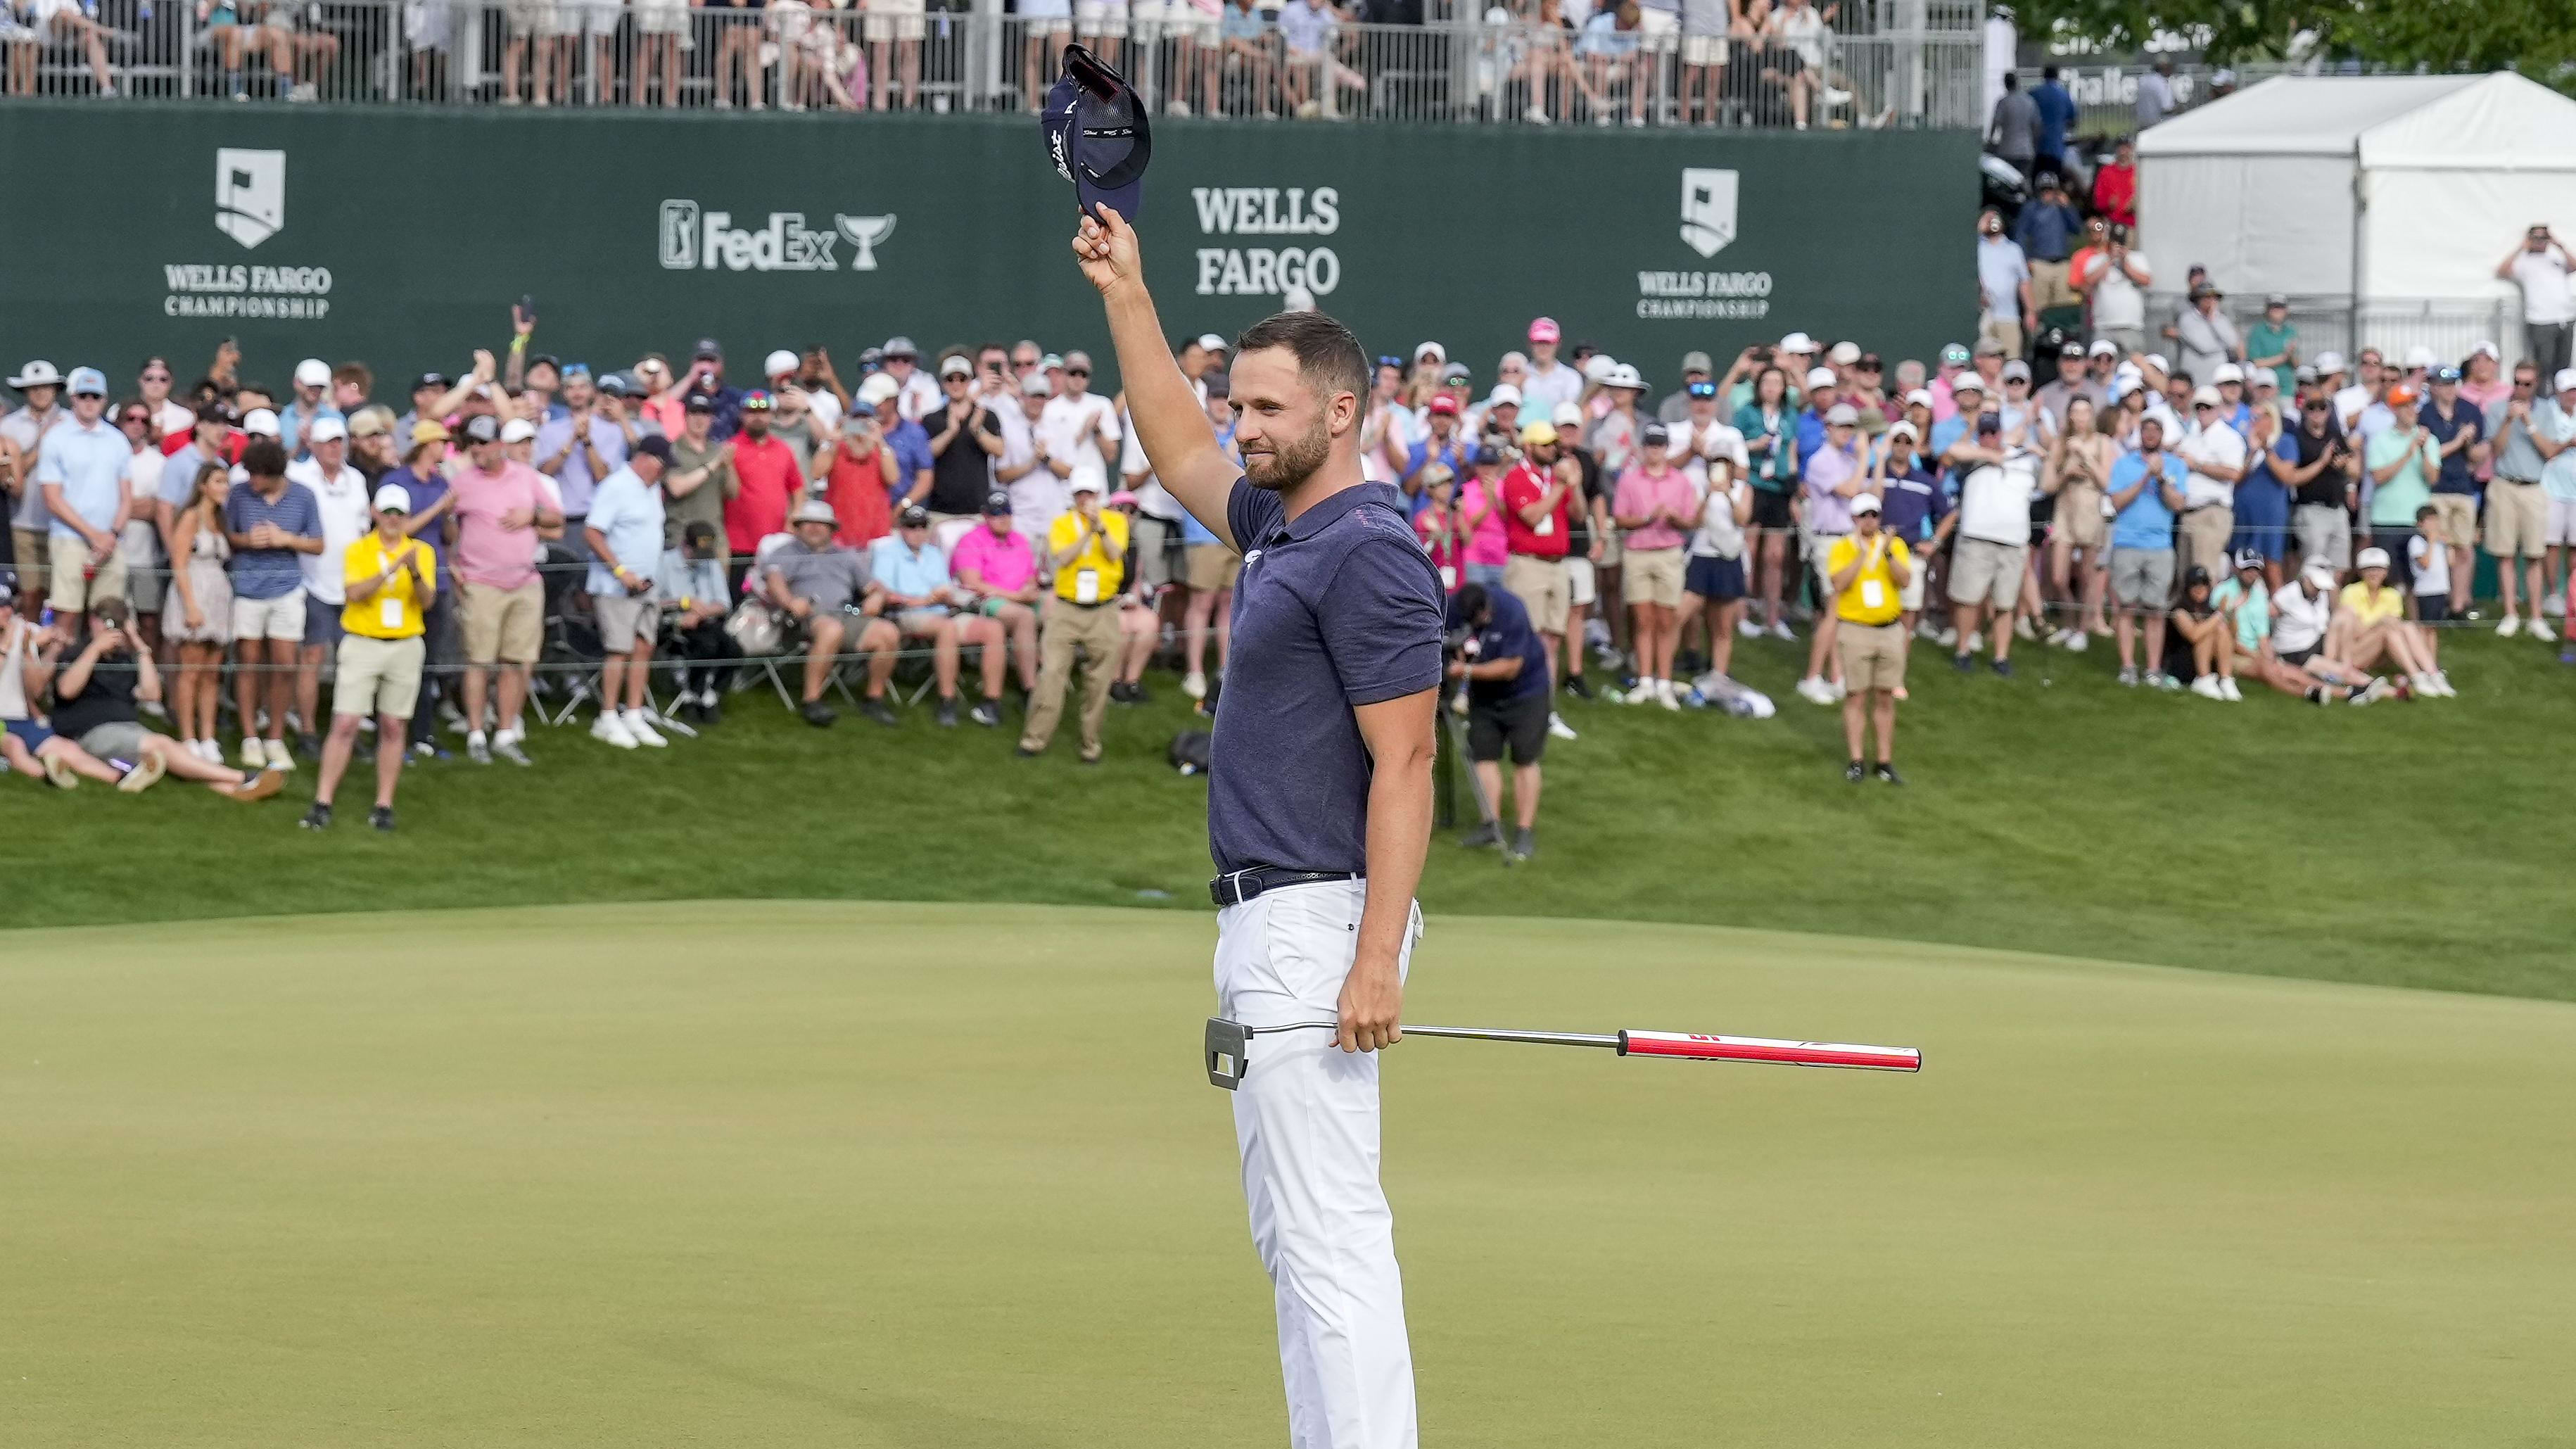 Wells Fargo Championship Picks, Predictions, and Odds (Bet on Wyndham Clark to Go Back-to-Back)